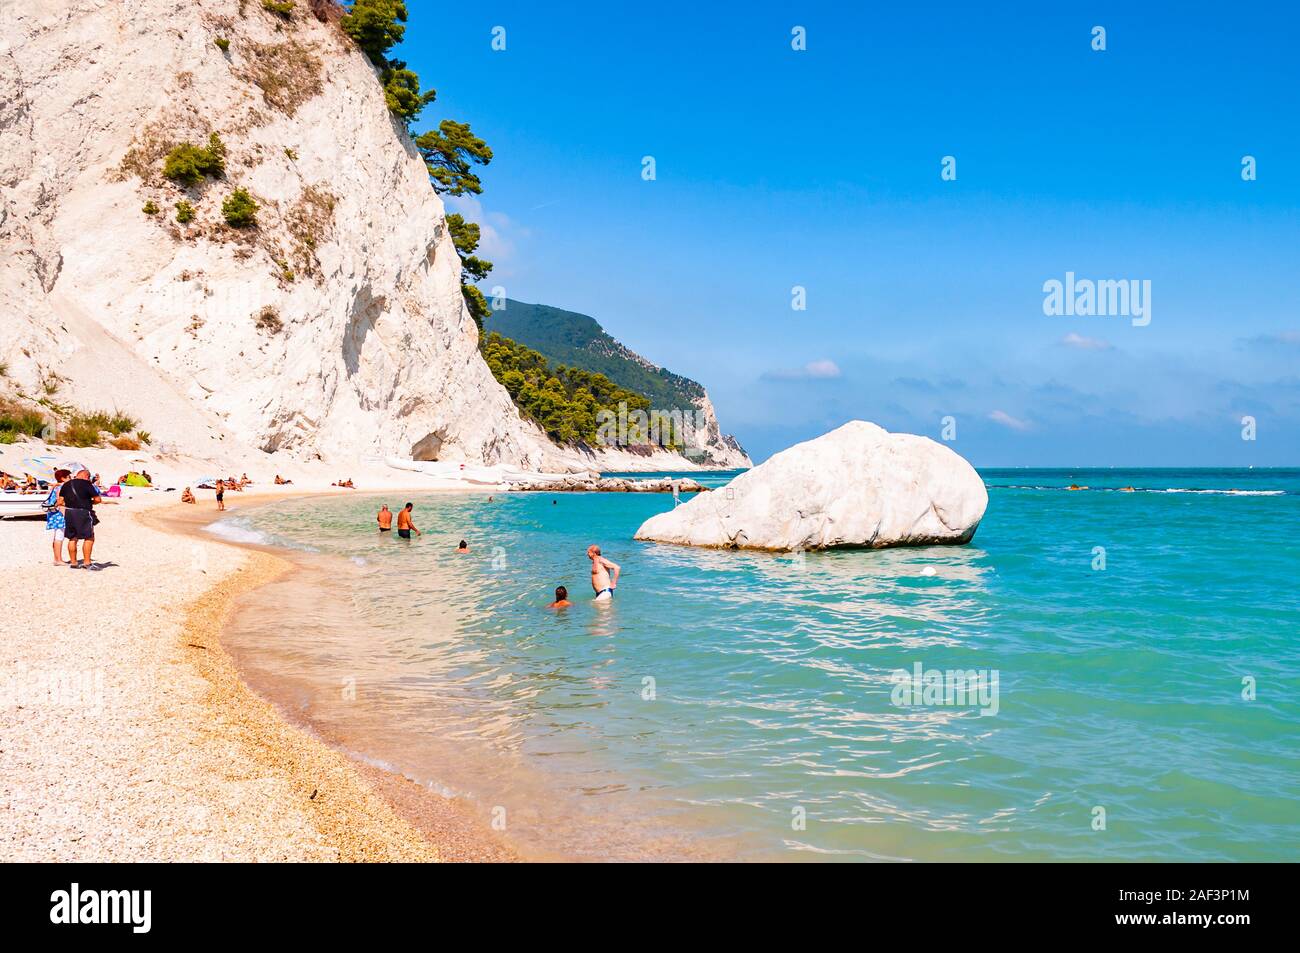 Spiaggia del Frate, Numana, Ancona, Marche, Italy - September 11, 2019: People resting on amazing white pebbles beach surrounded by high massive white Stock Photo